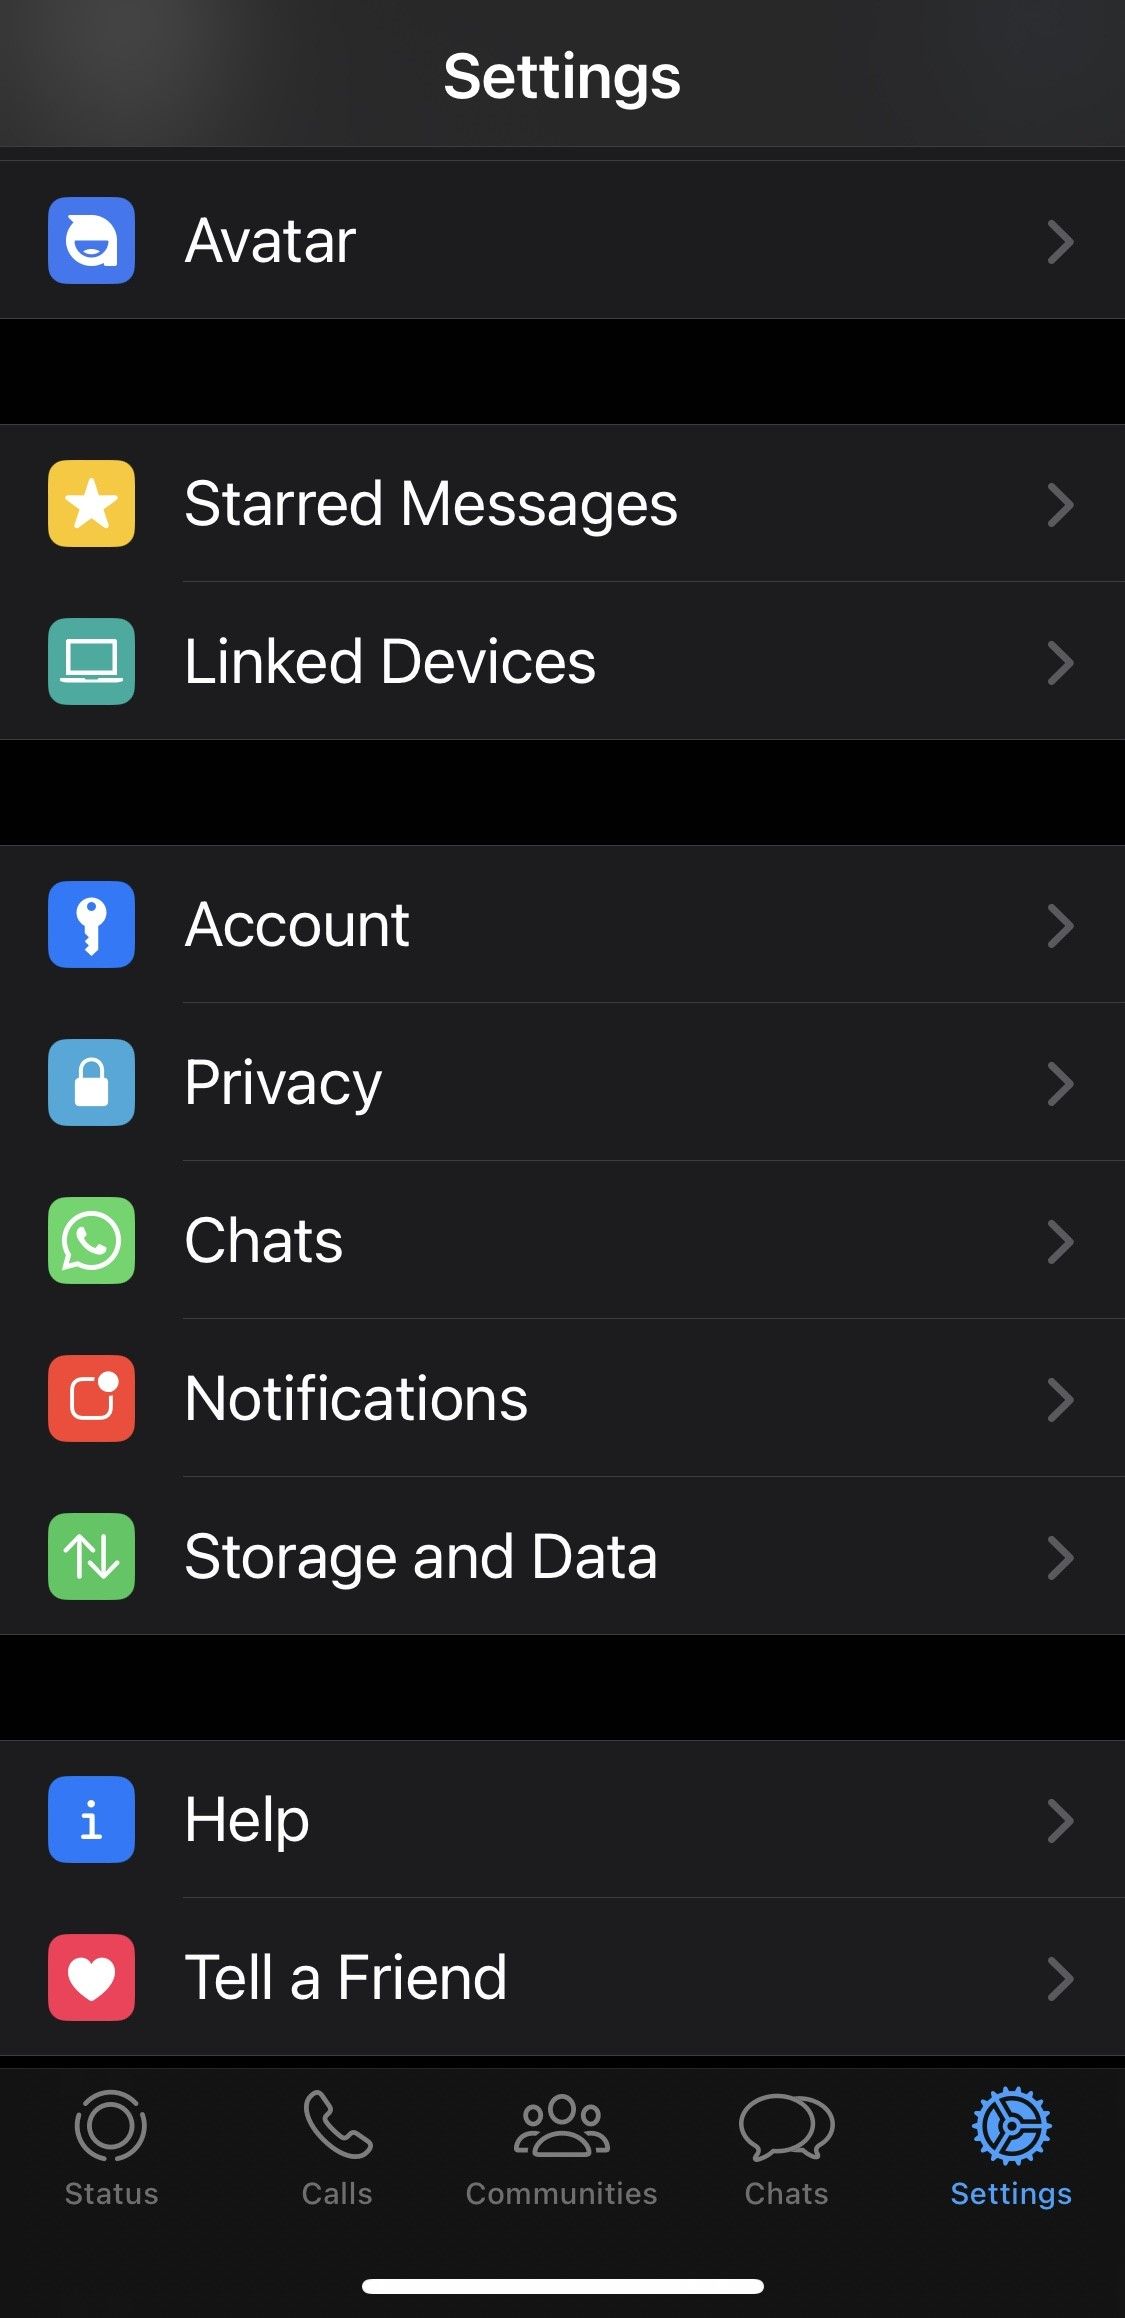 Open the Linked Devices Option in the WhatsApp Settings